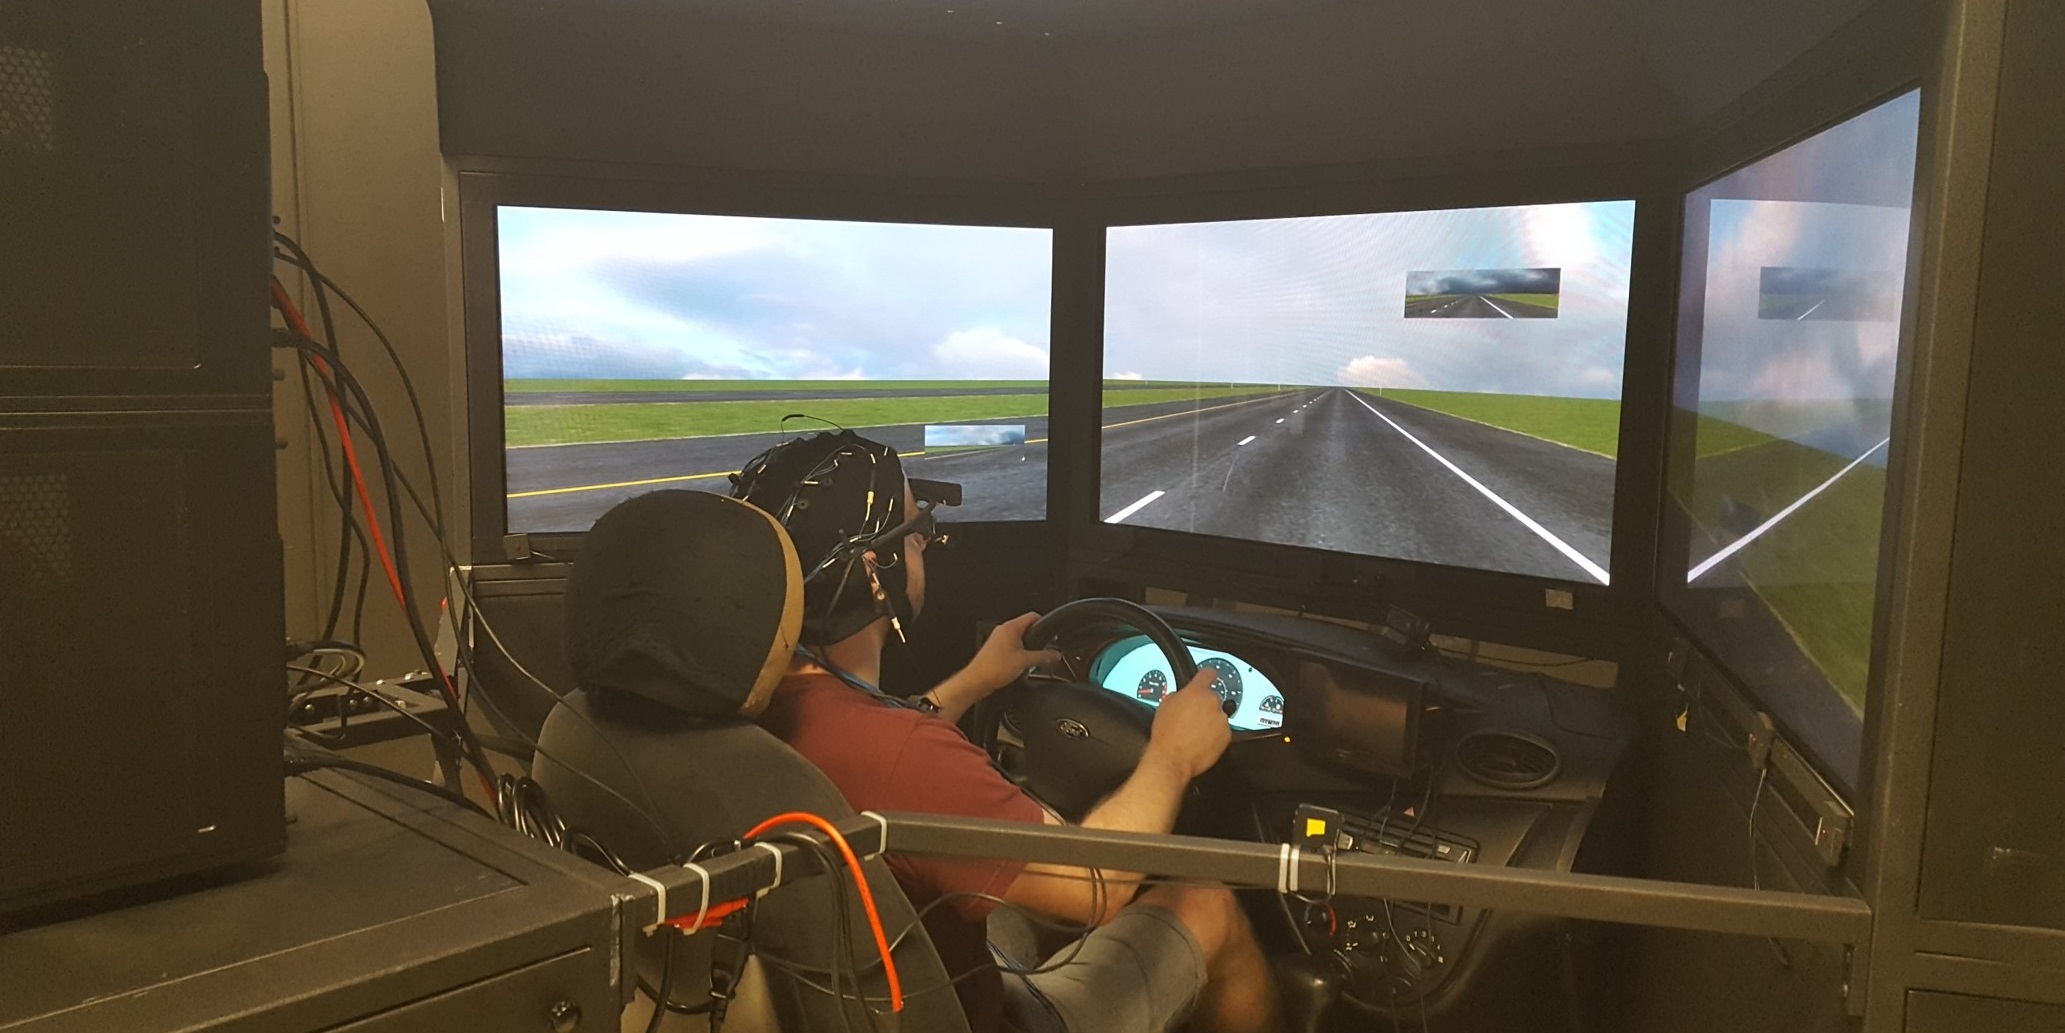 Driving simulator with experiment subject (NHTSA)